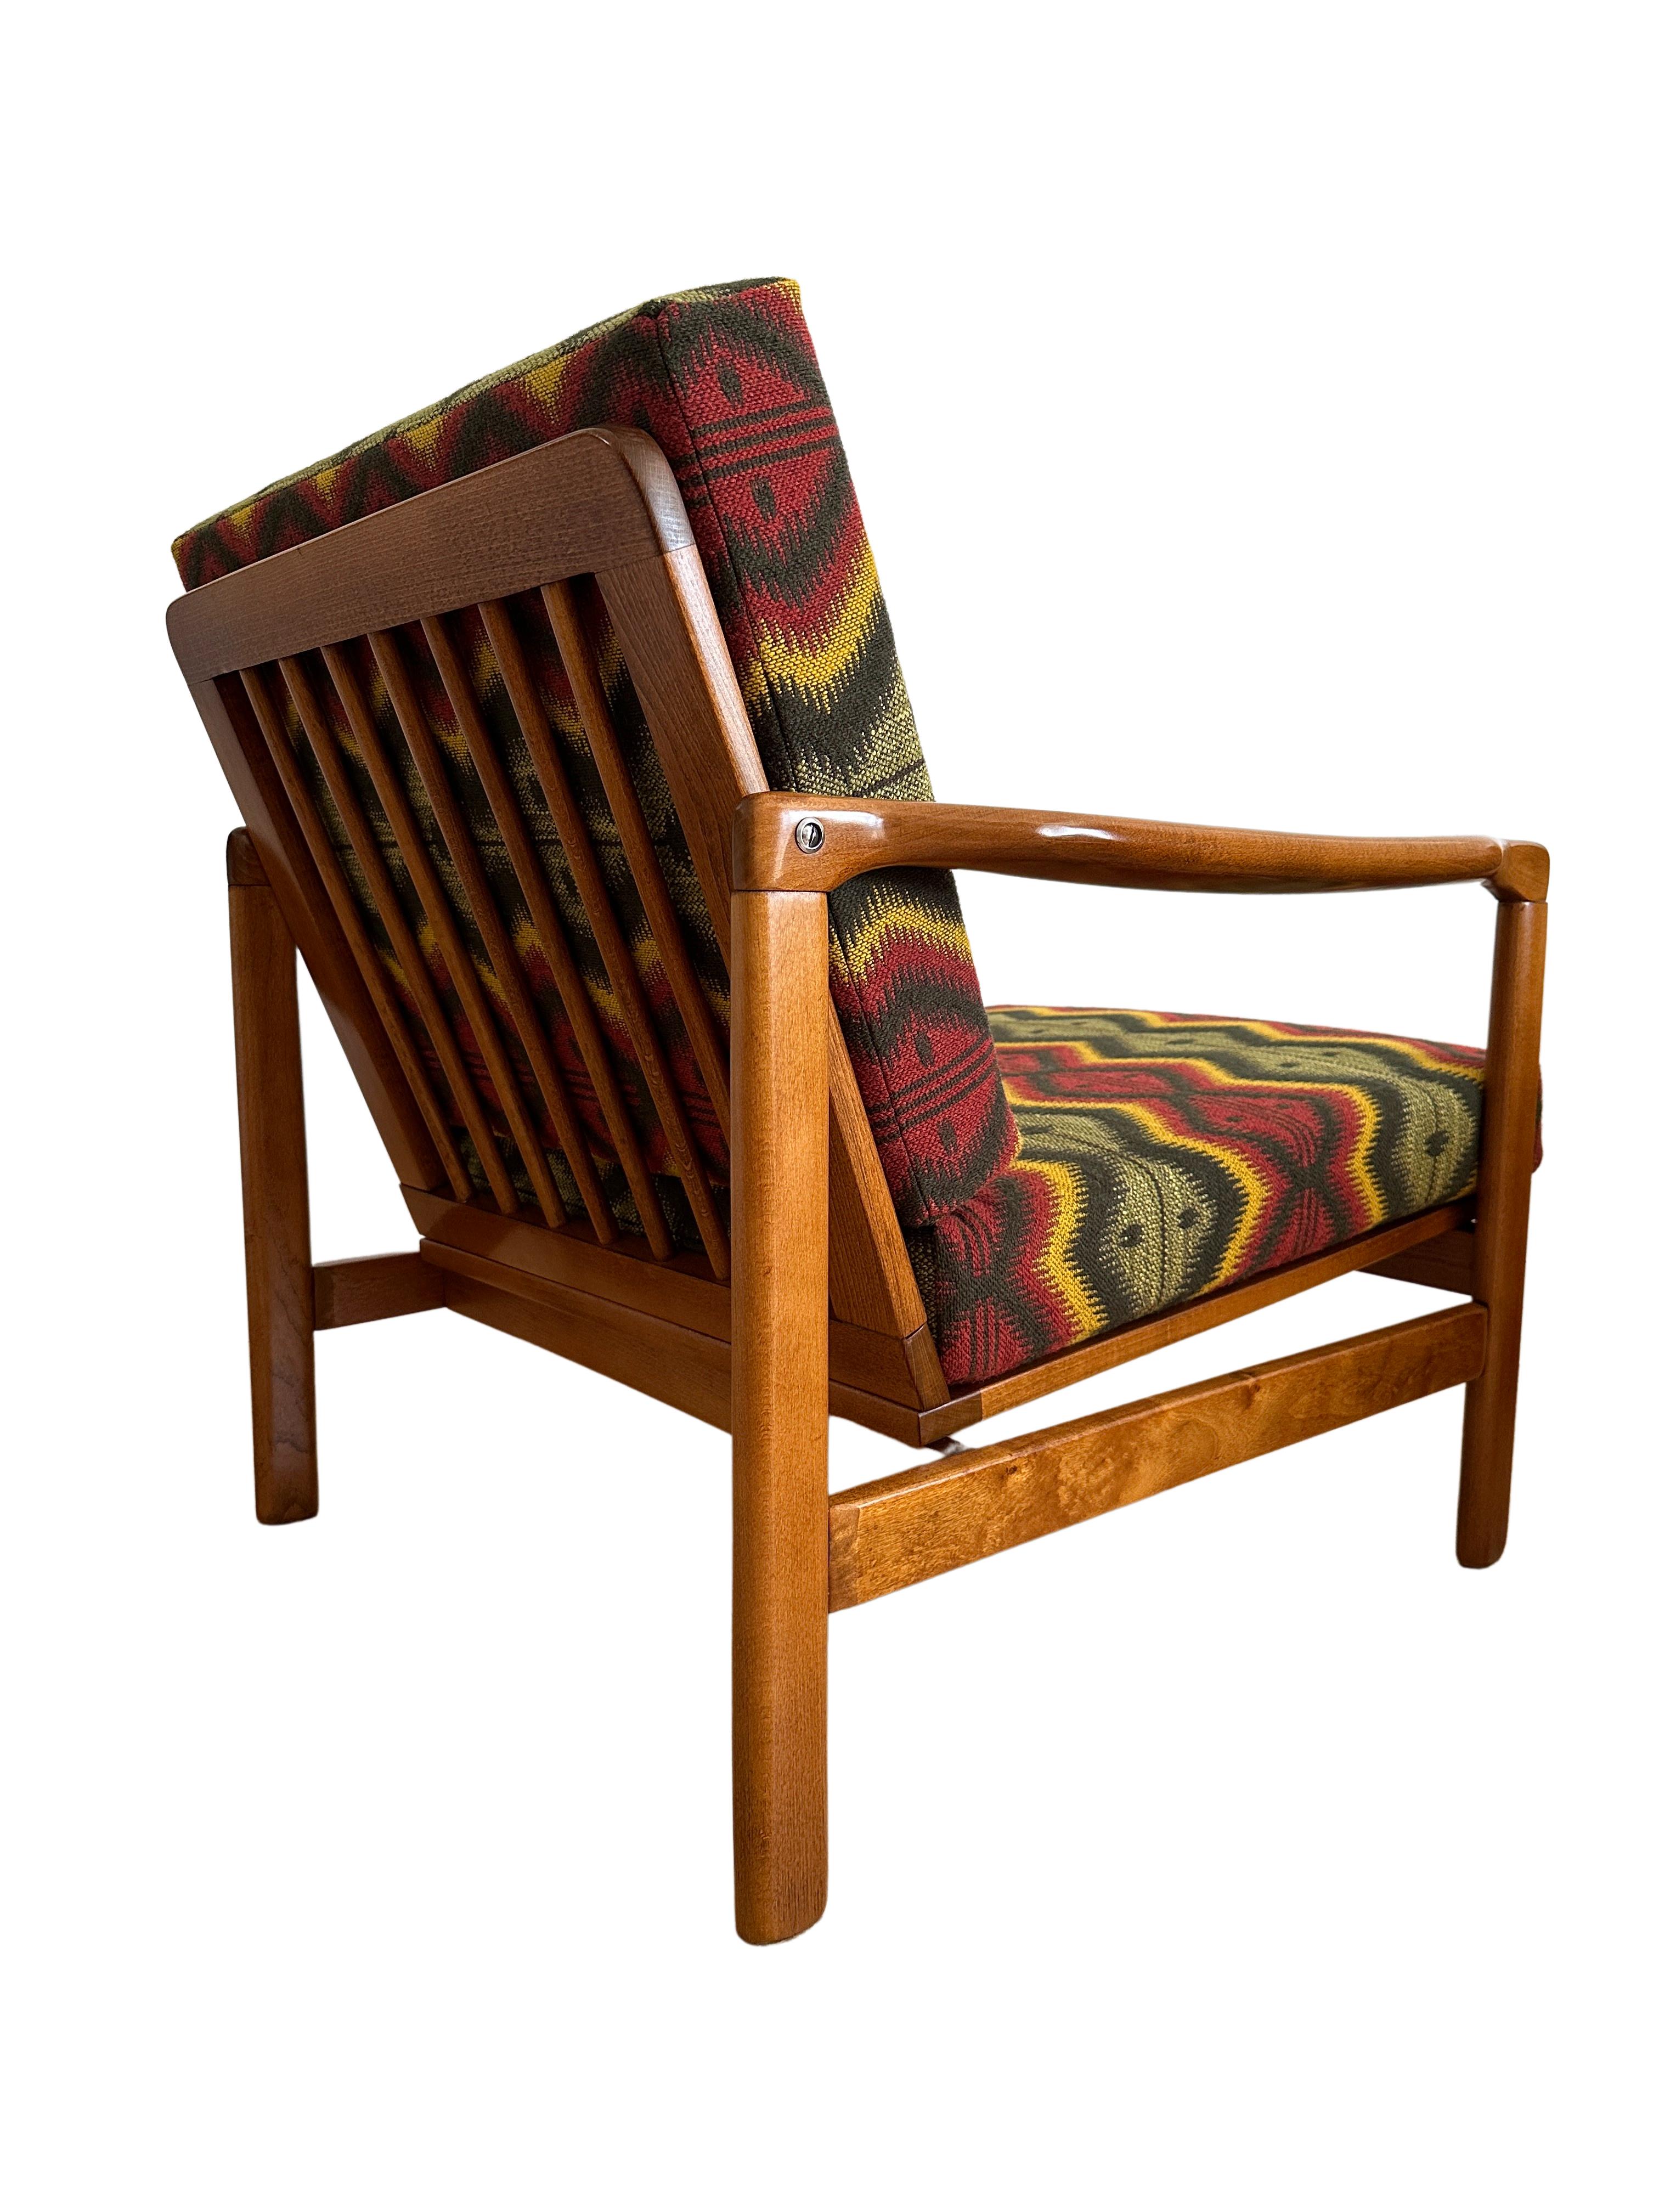 Midcentury Armchair by Zenon Bączyk, Mind the Gap Upholstery, Europe, 1960s For Sale 1